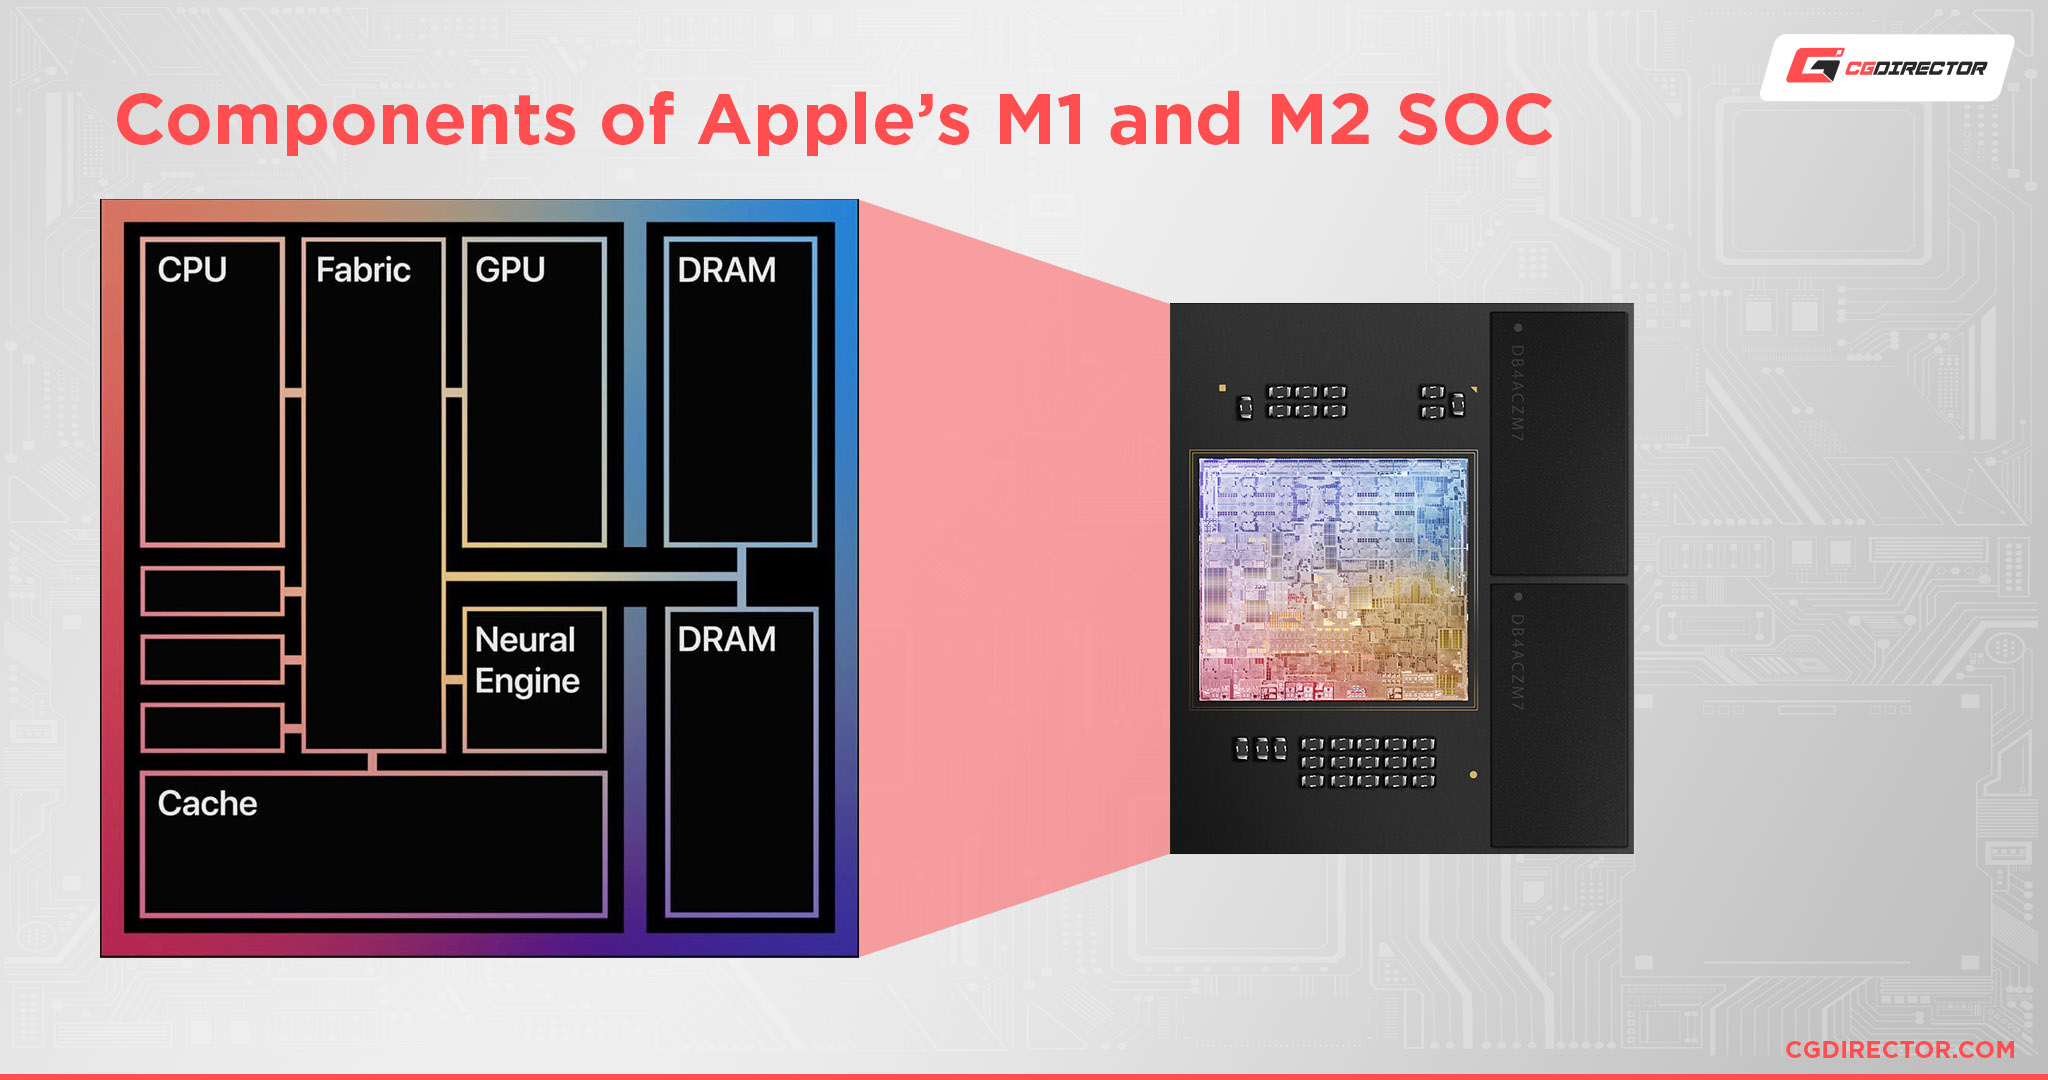 Components of Apple’s M1 and M2 SOC